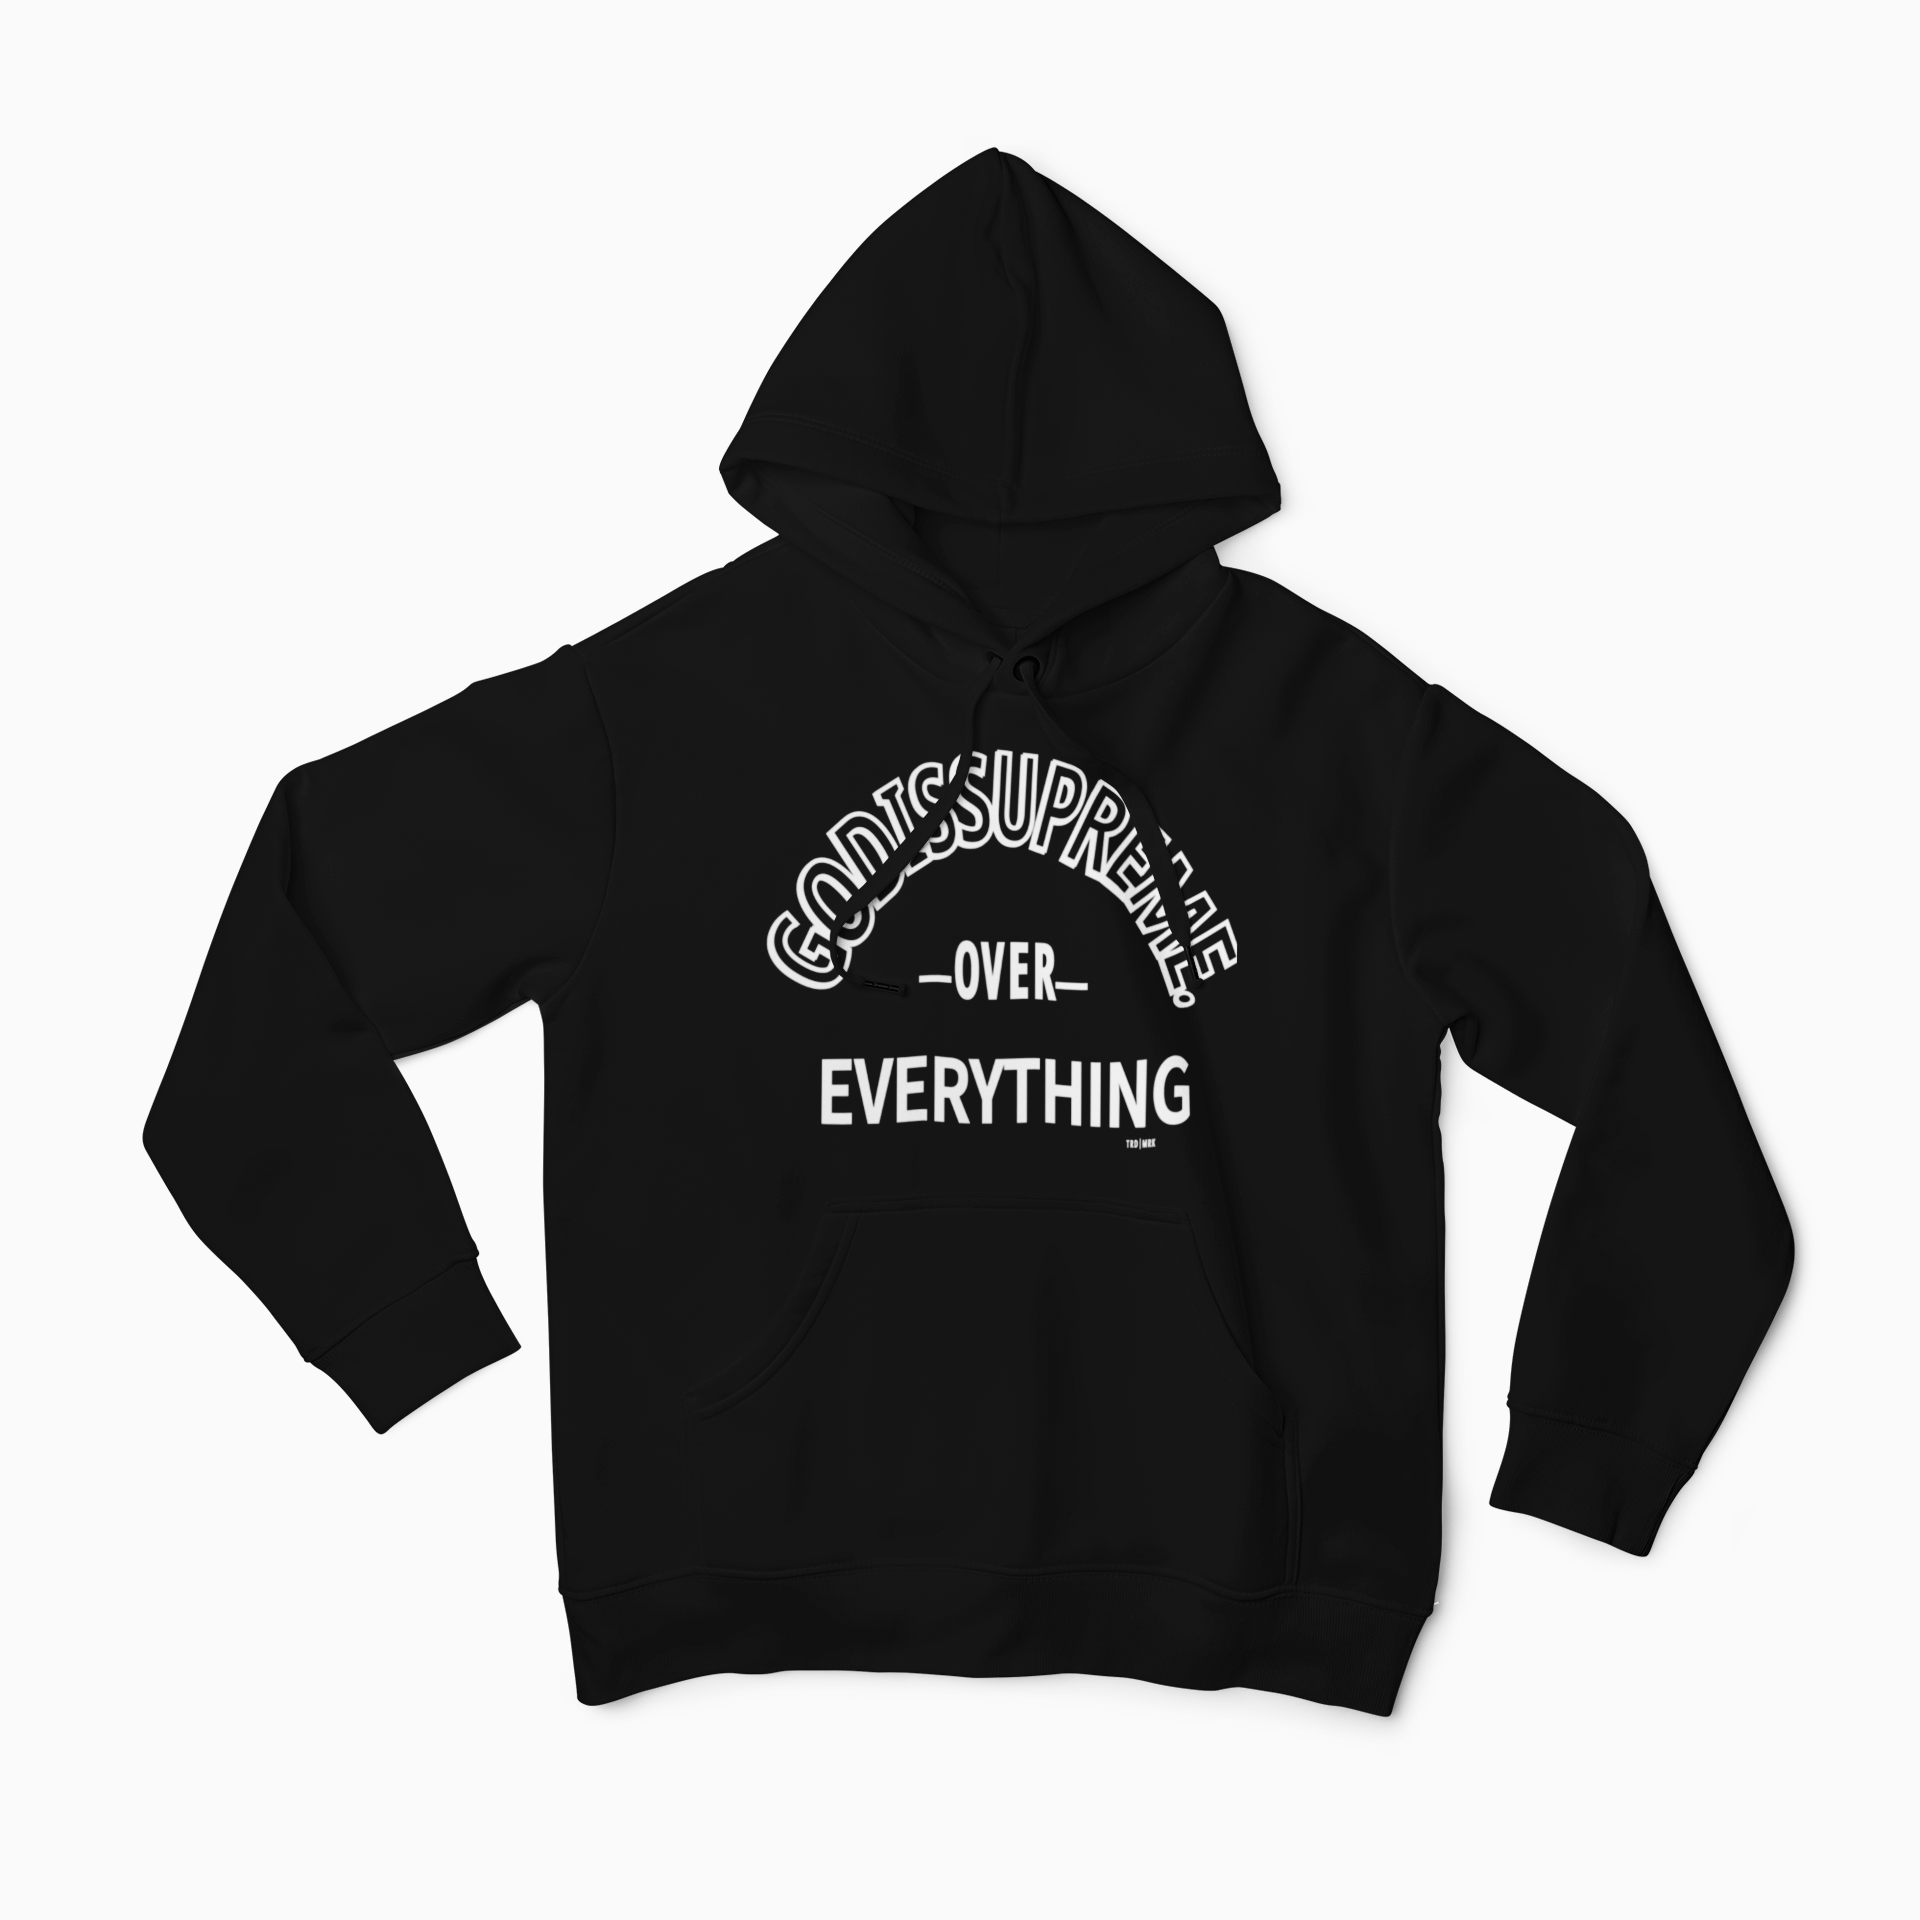 God is Supreme Over Everything /Black Hoodie